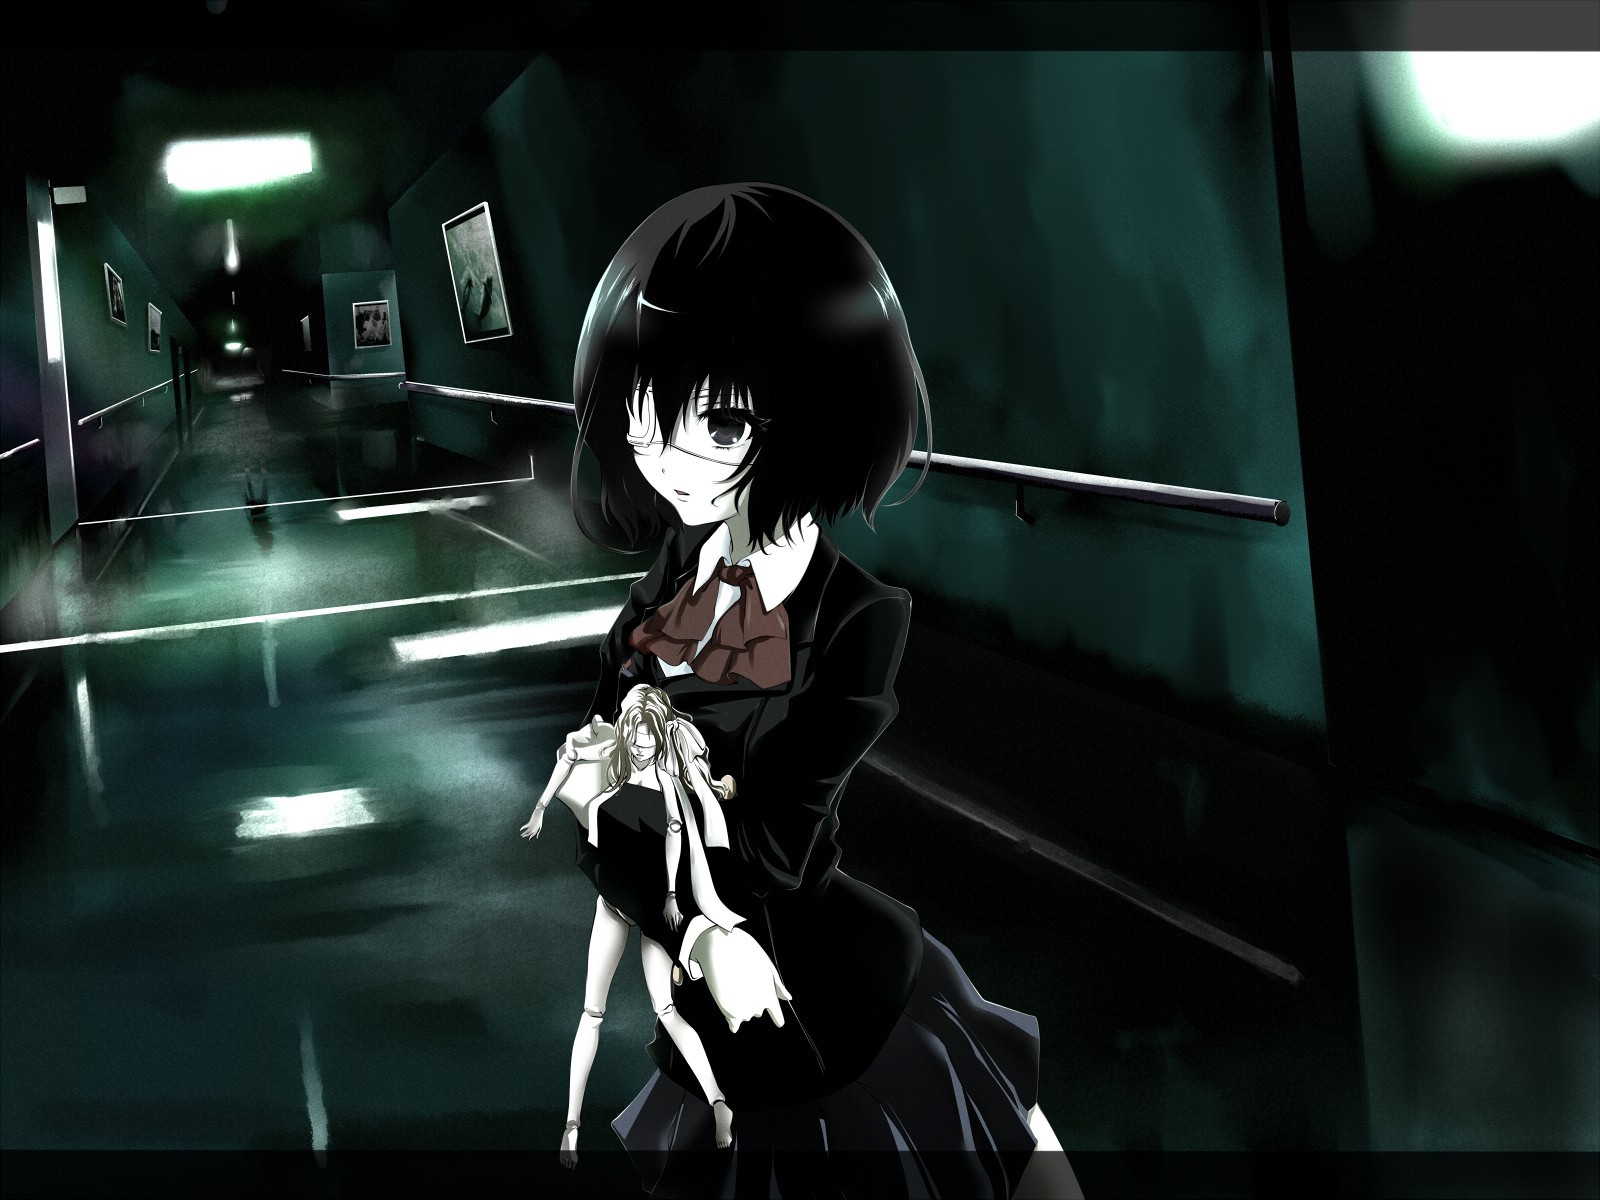 another anime wallpaper,black hair,snapshot,anime,games,pc game